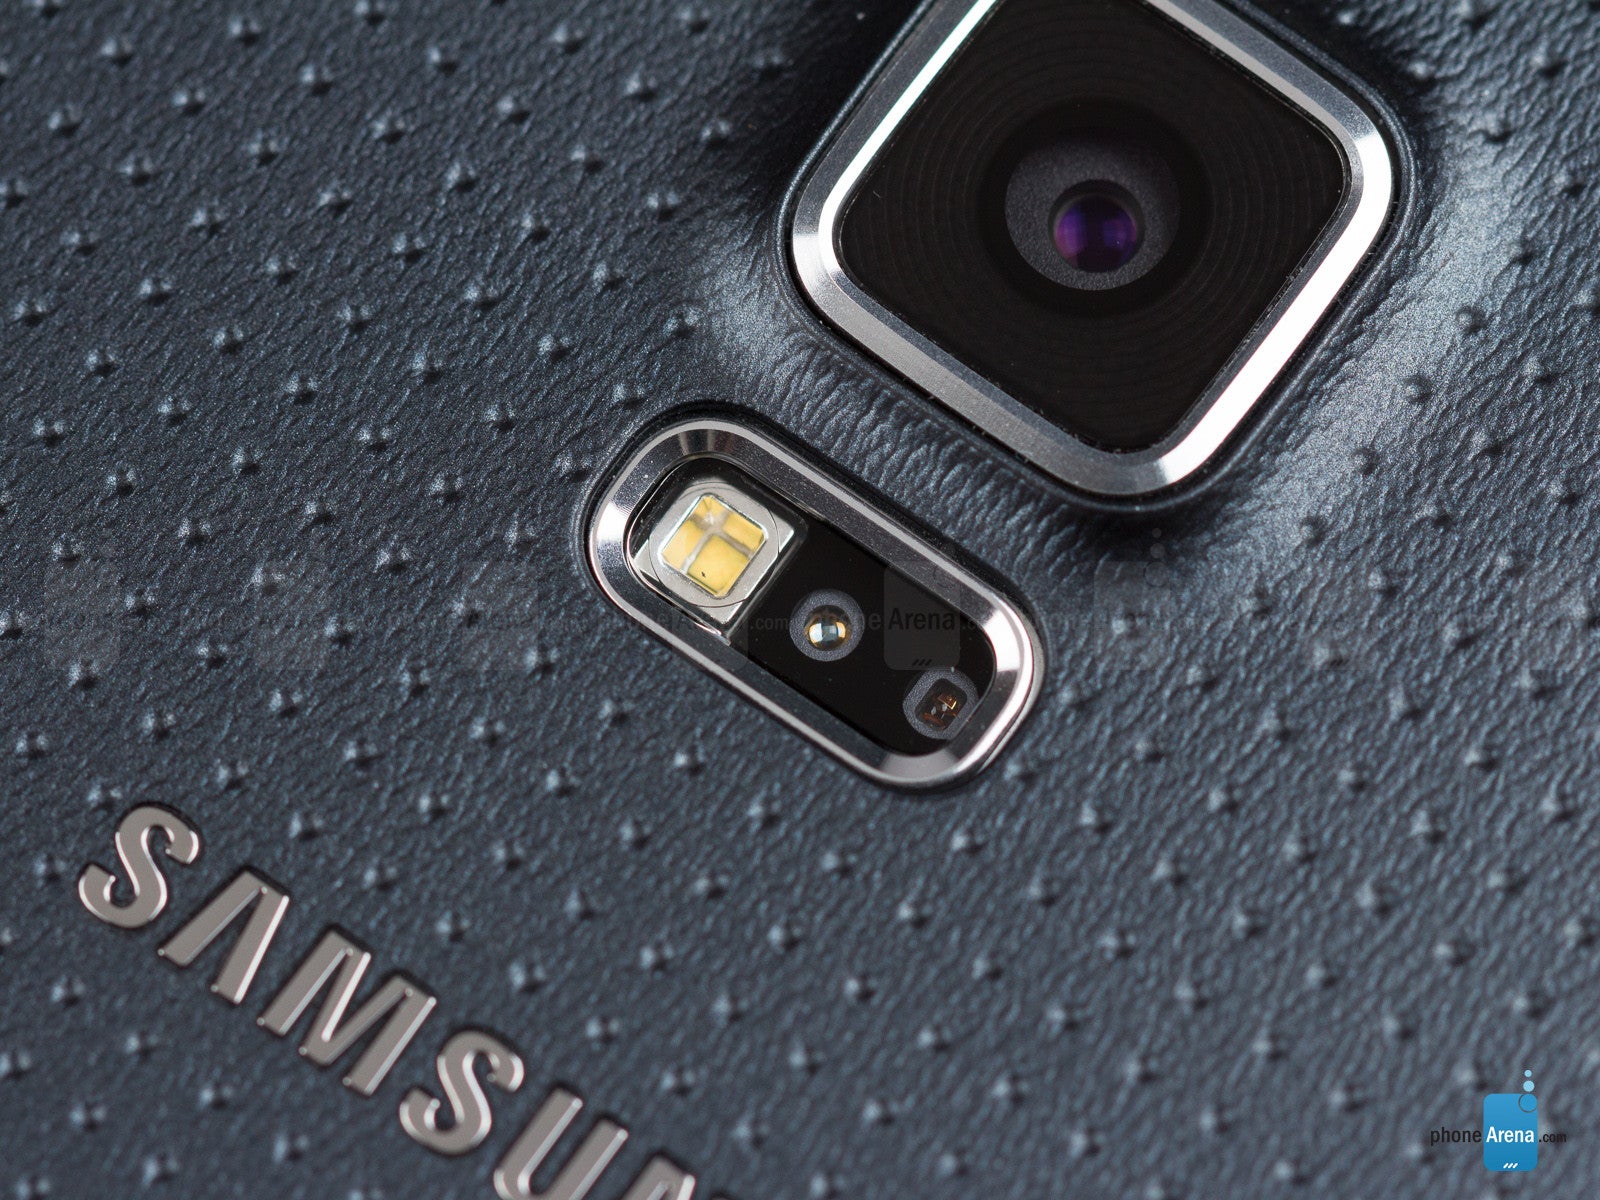 The heart rate sensor on the Galaxy S5 - Did you know how many different kinds of sensors go inside a smartphone?